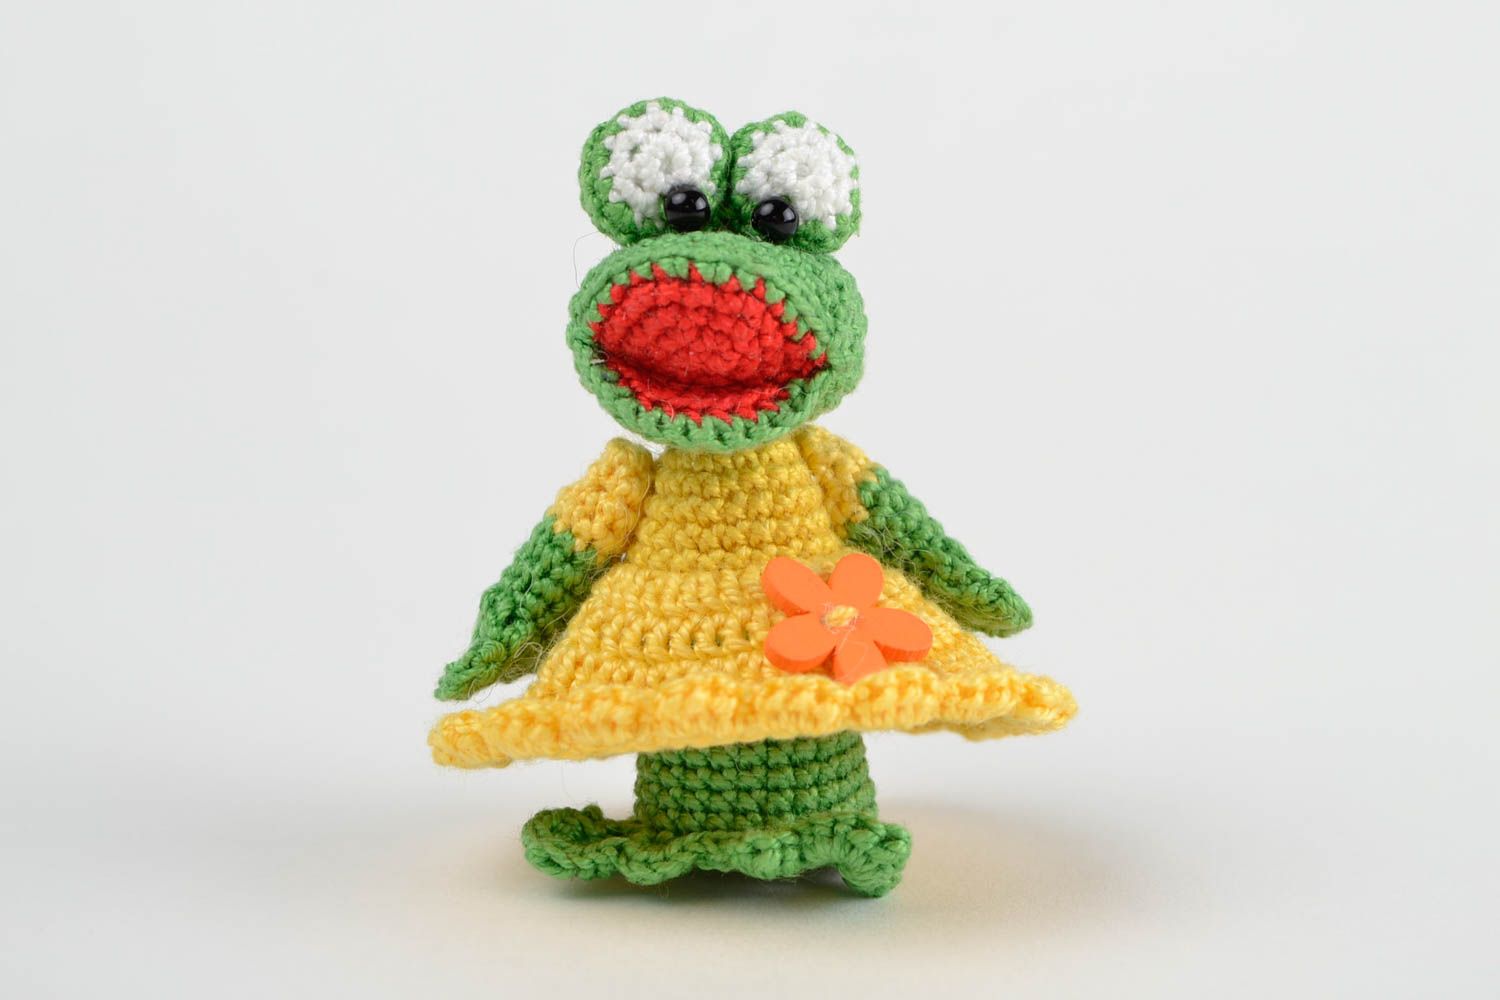 Handmade toy crocheted toys for children gift ideas unusual soft toys photo 5